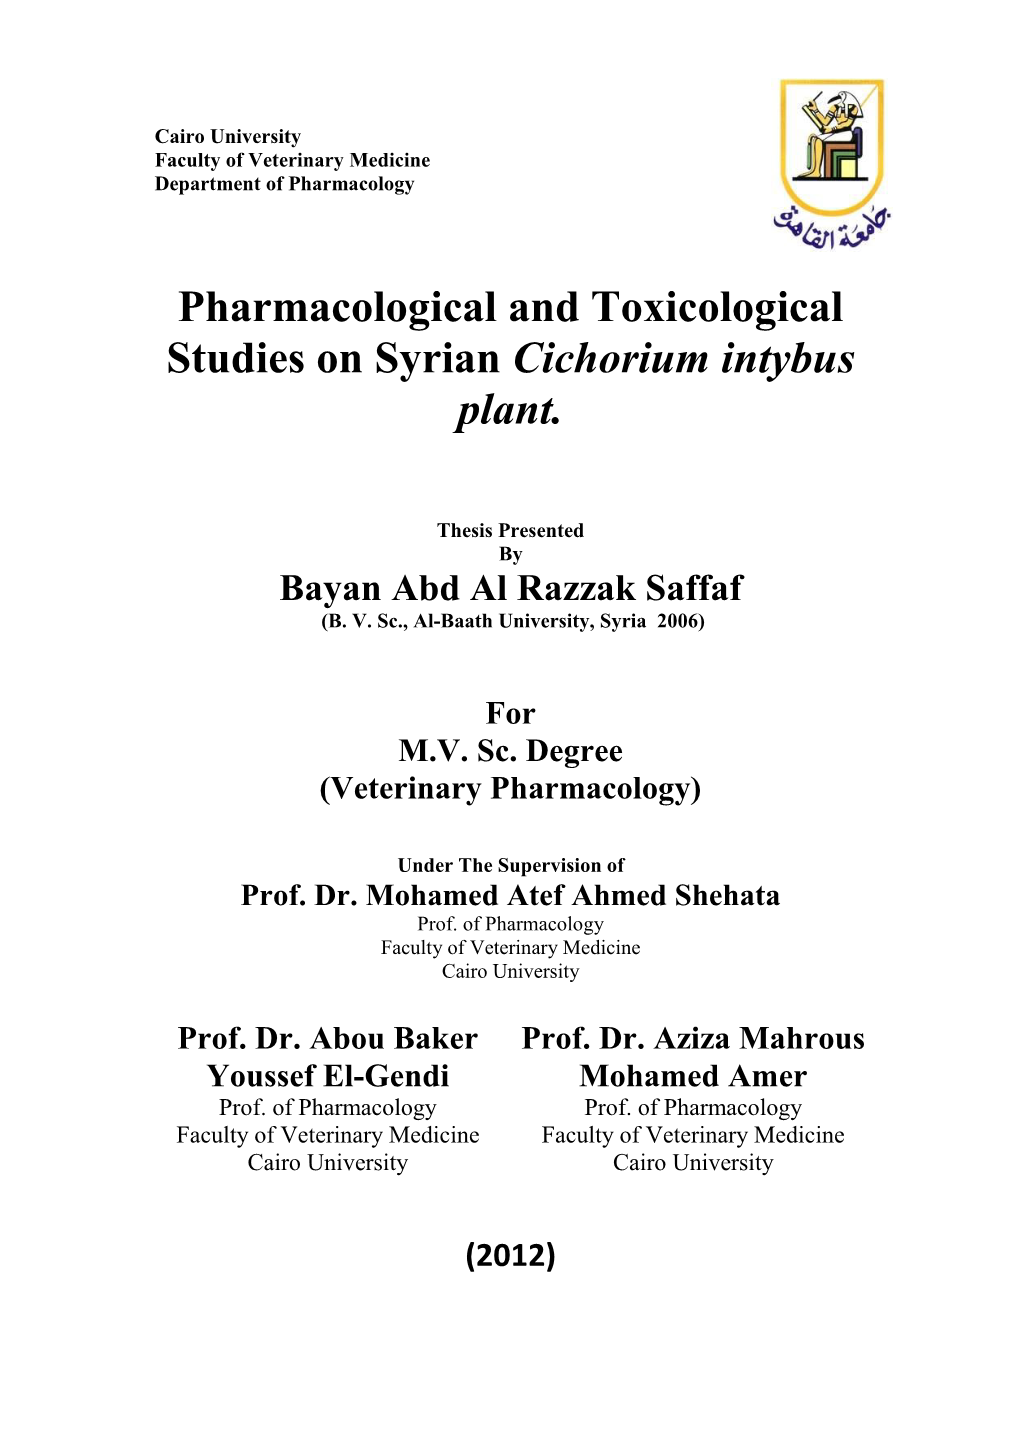 Pharmacological and Toxicological Studies on Syrian Cichorium Intybus Plant